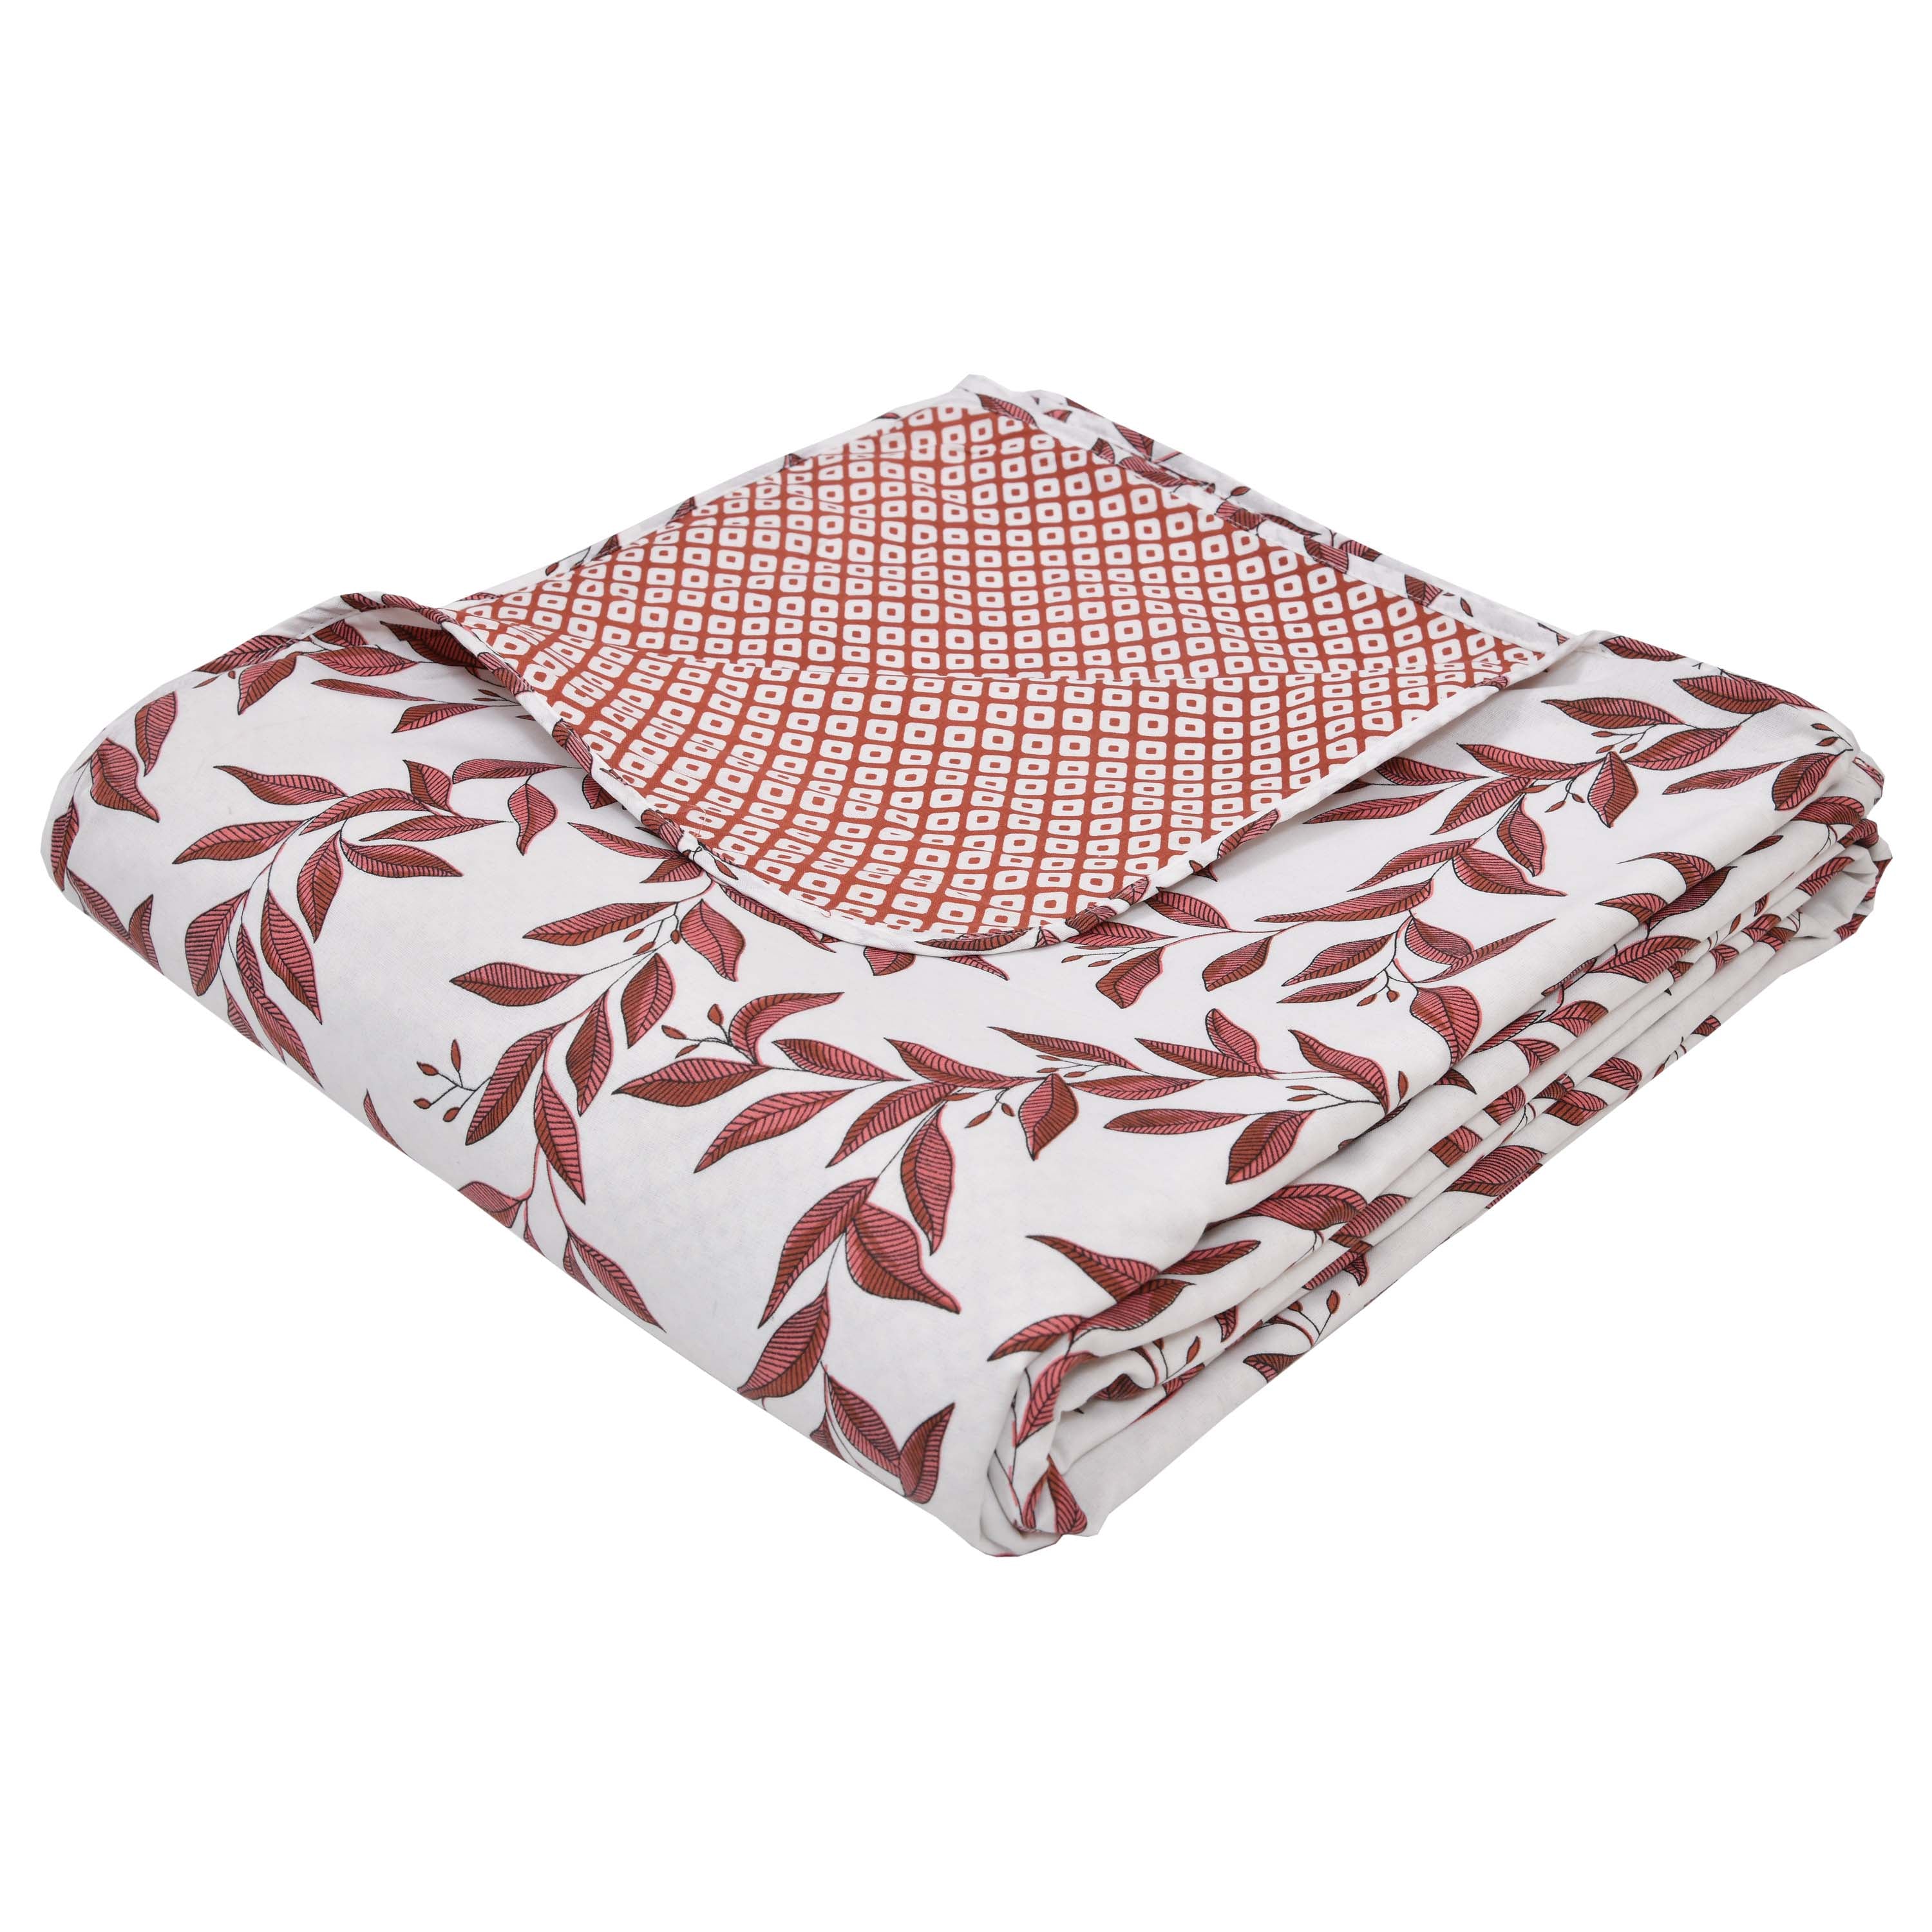 Dohar Cotton-Double Bed- Autumn Red